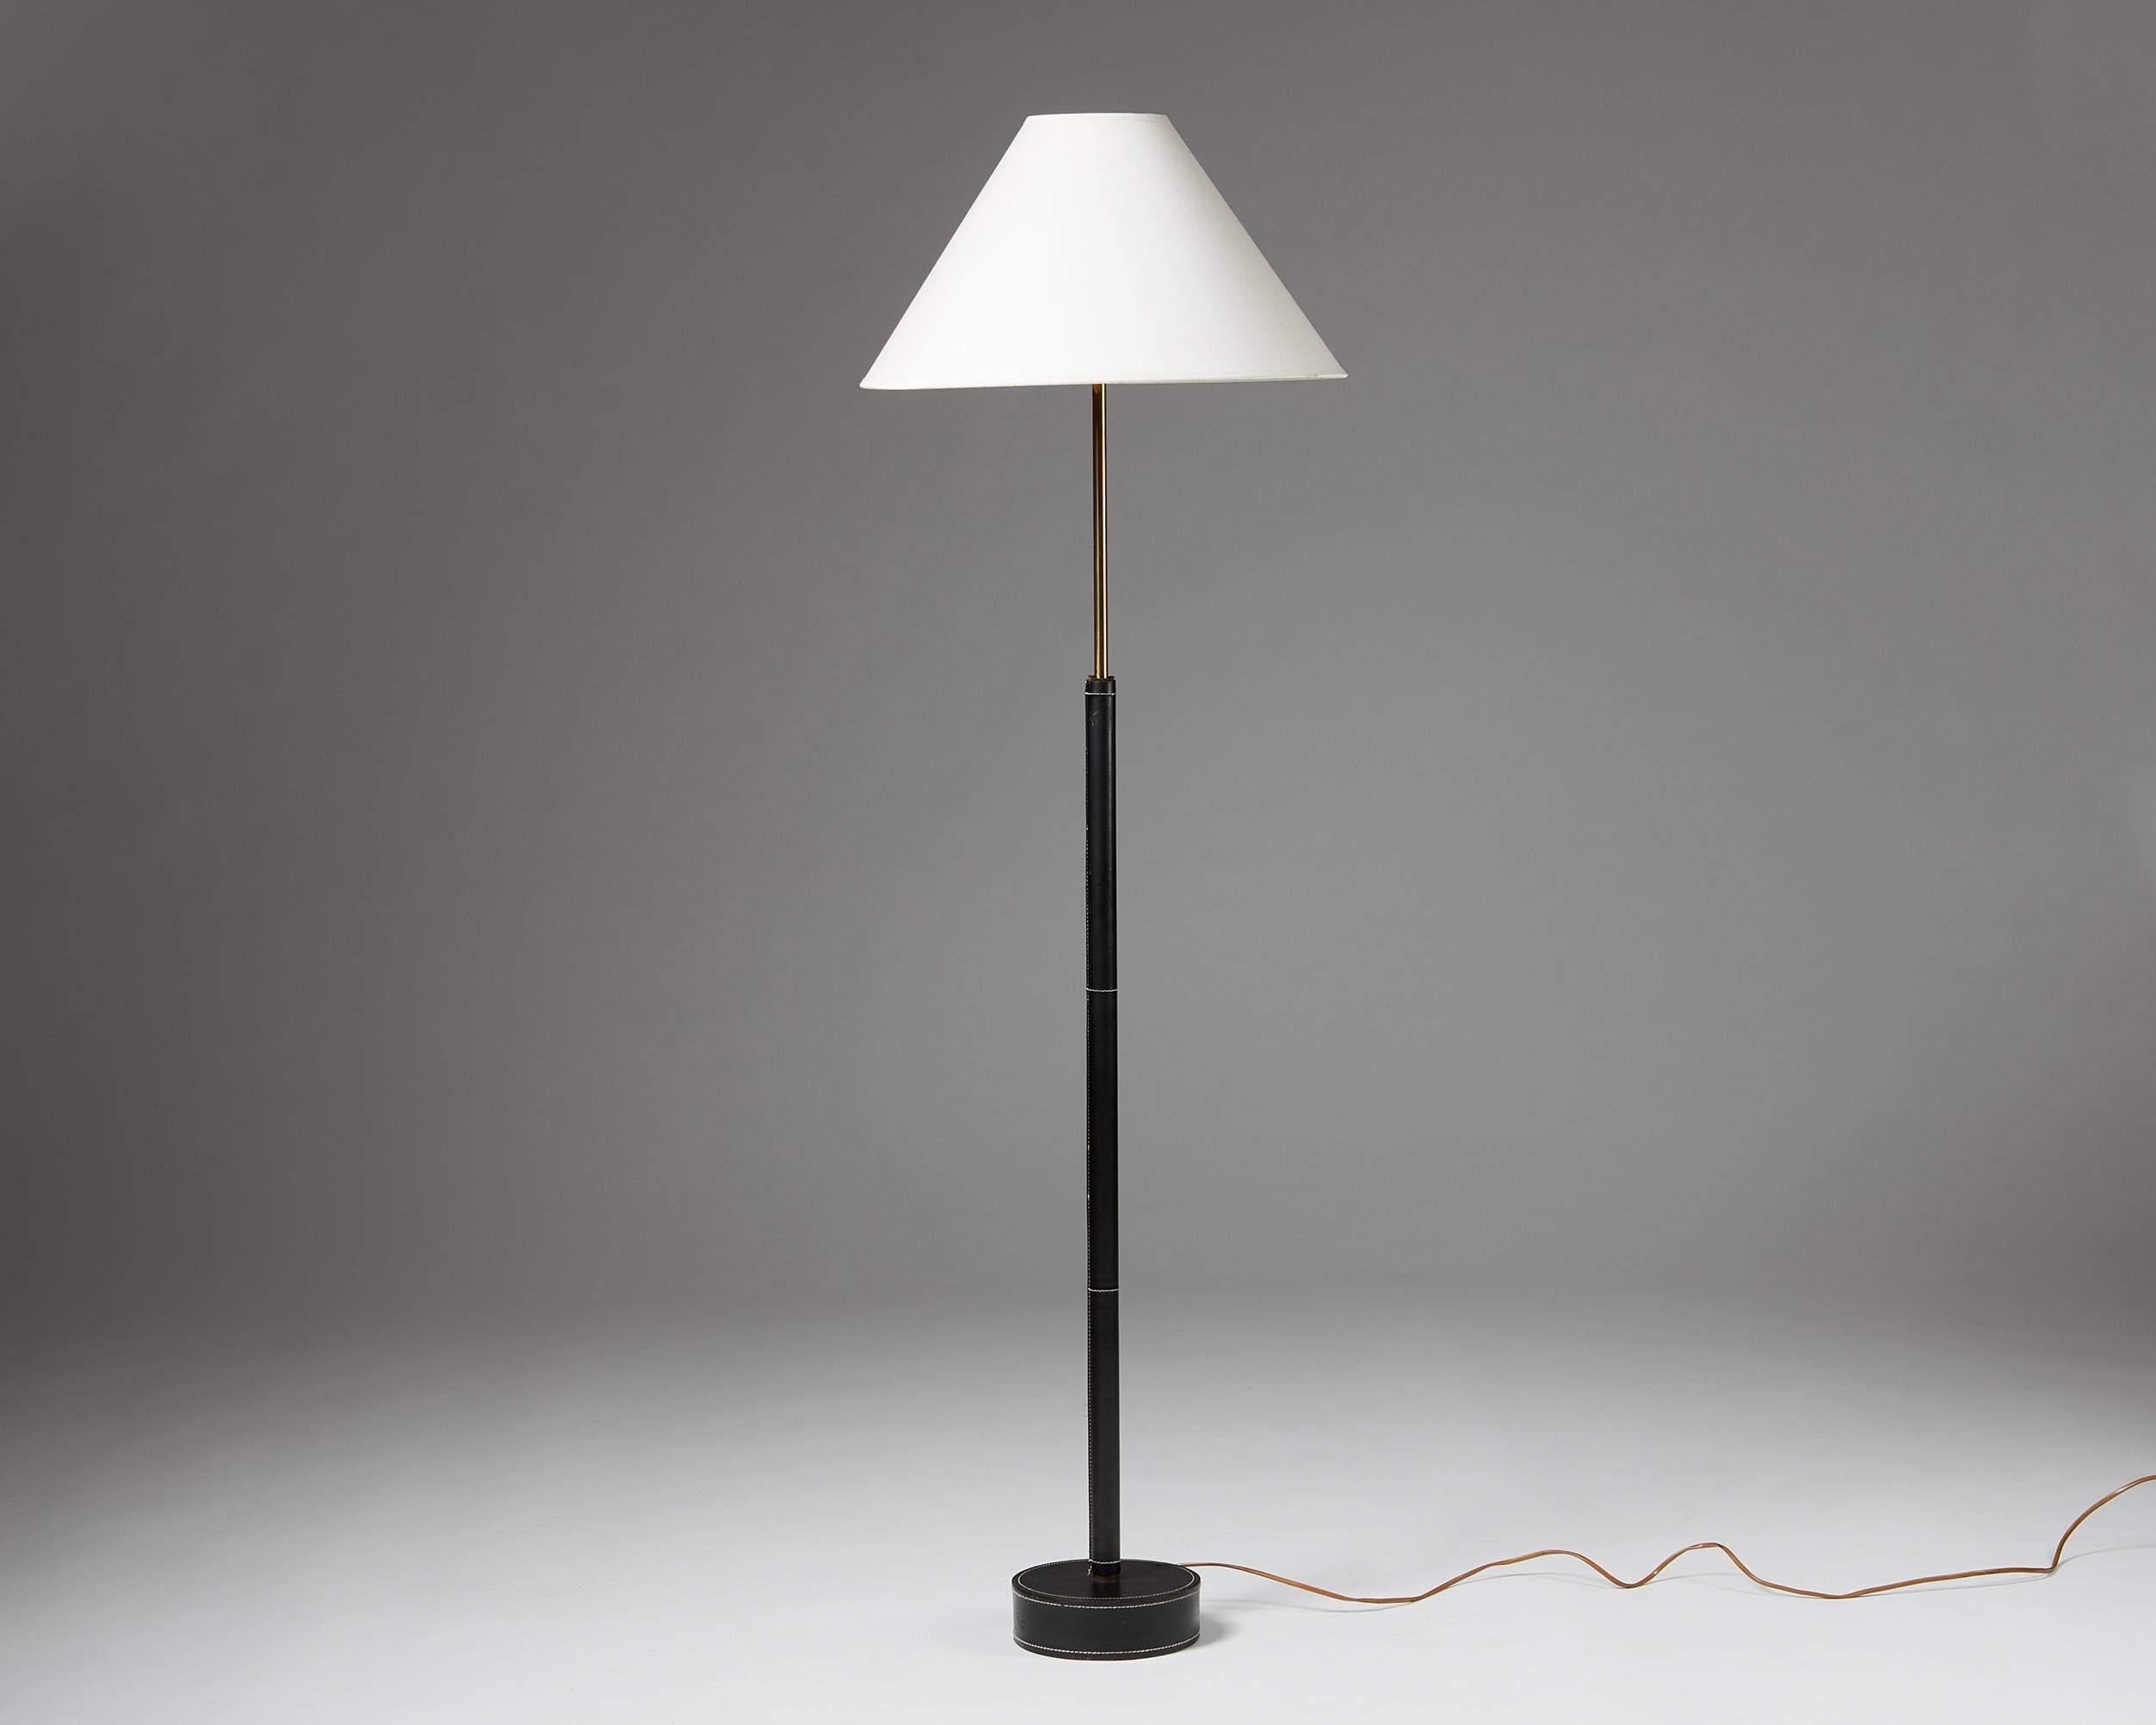 Sweden, 1960’s

Leather stand, canvas lamp shade.

Marked “Bergbom G 08”

Measurements: 
W: 45 cm / 17 ¾’’
L: 146 cm / 4' 9